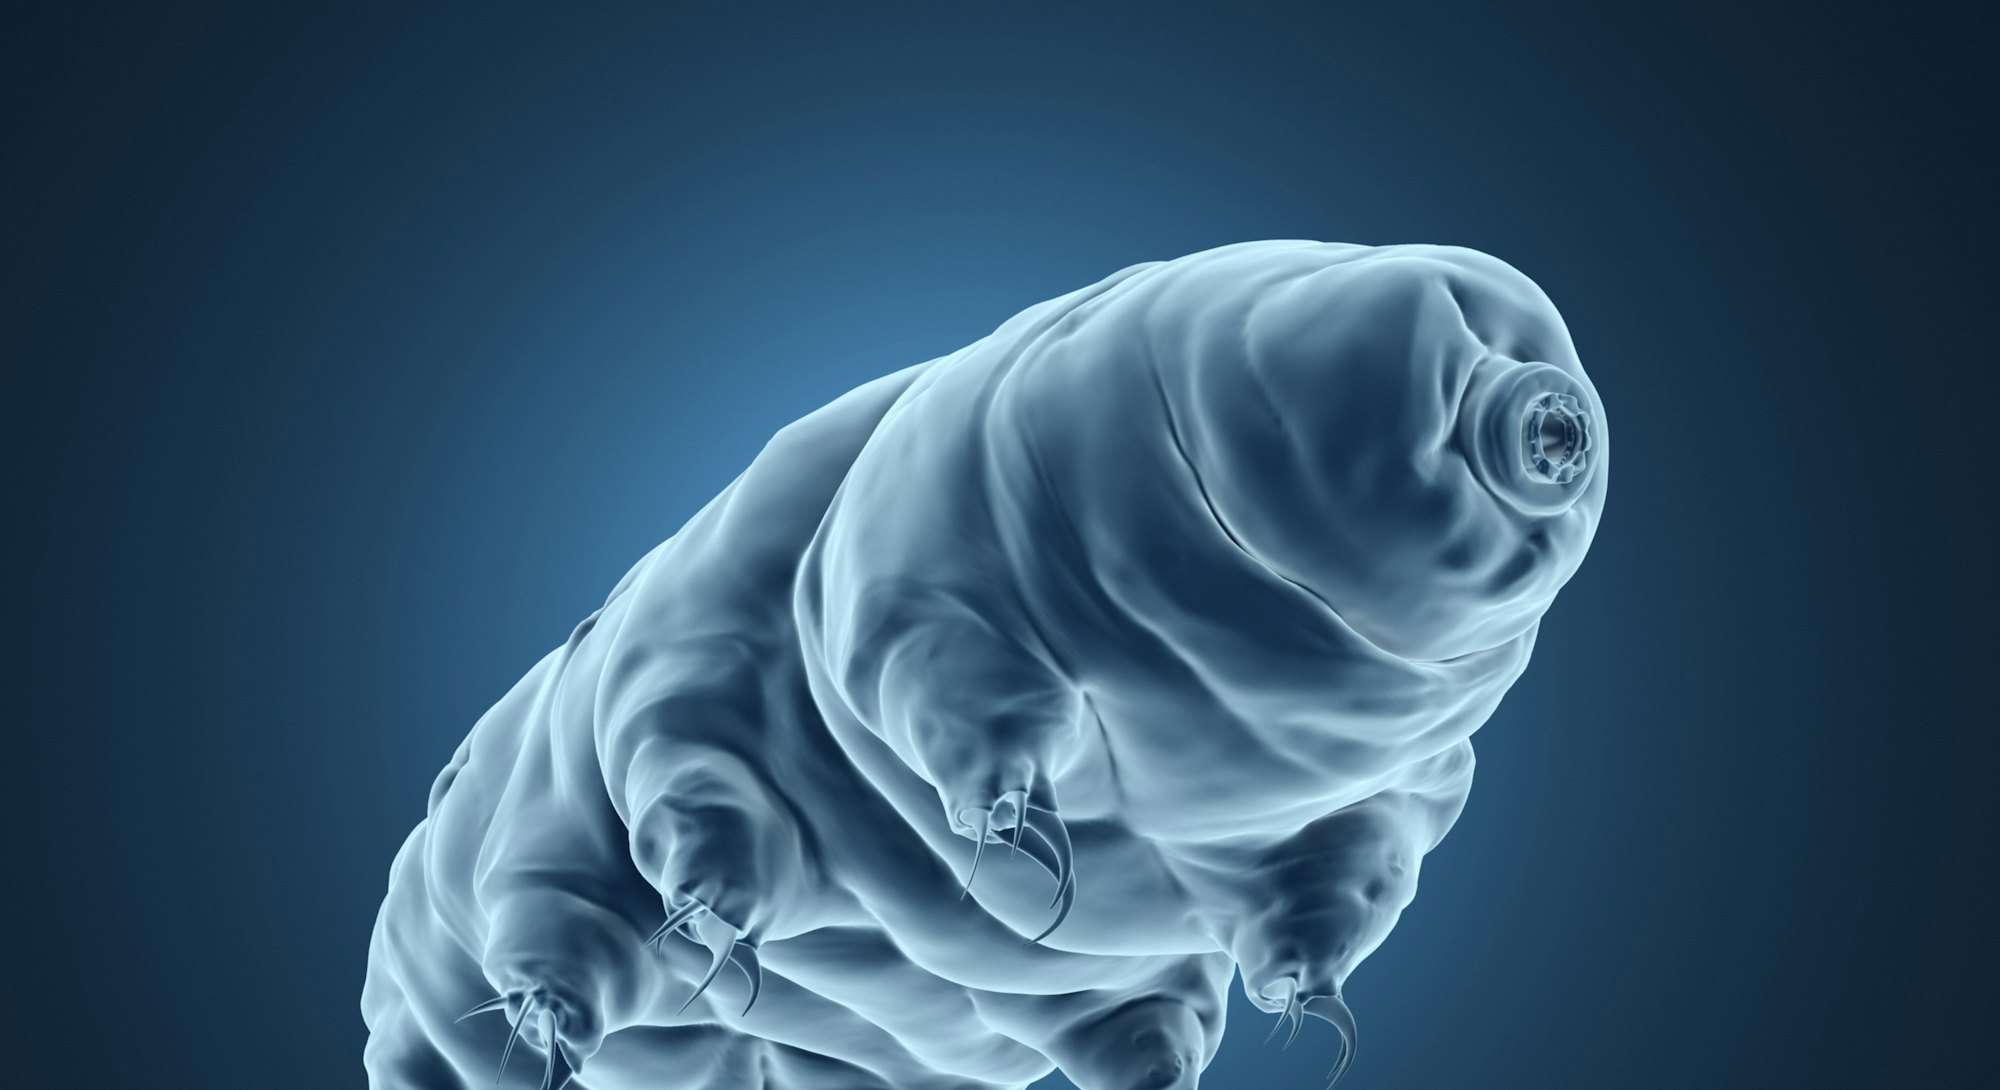 3d rendered realistic illustration of the tardigrade.